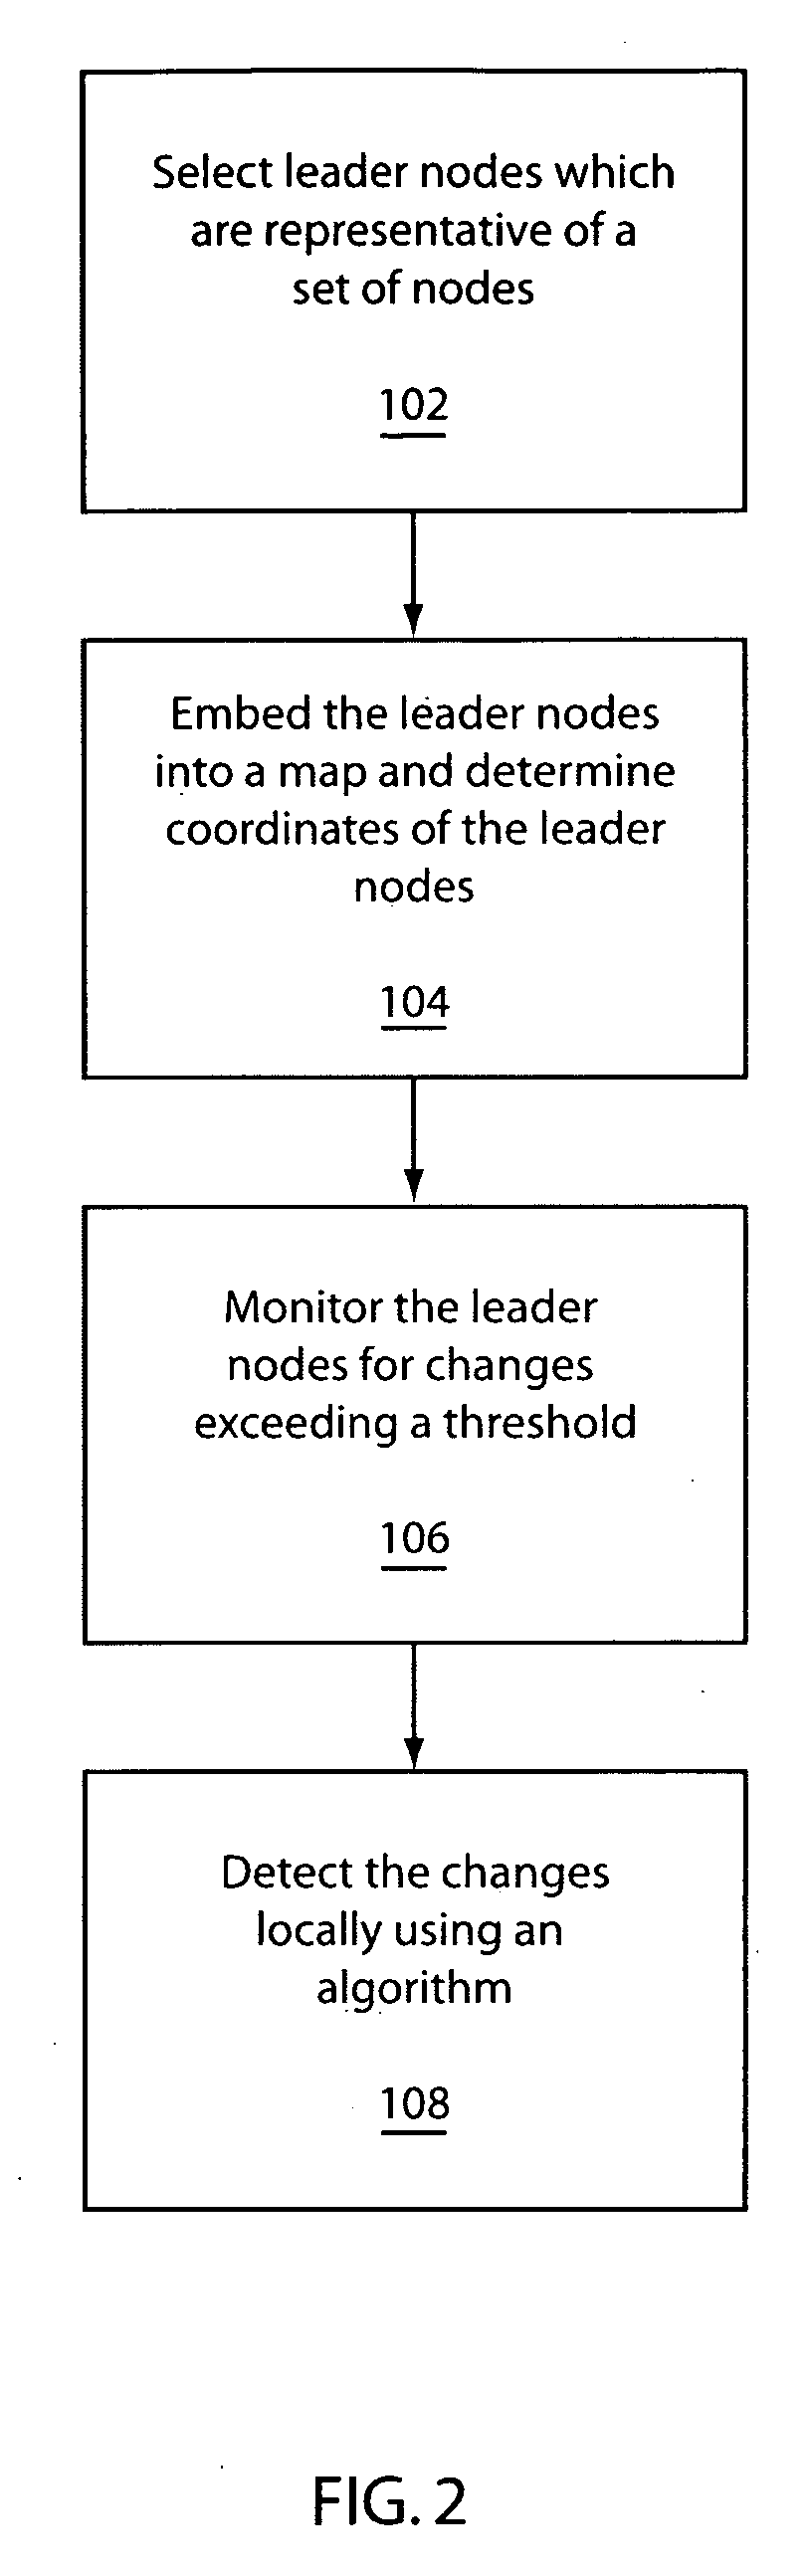 System and method for detecting status changes in a network using virtual coordinate mapping